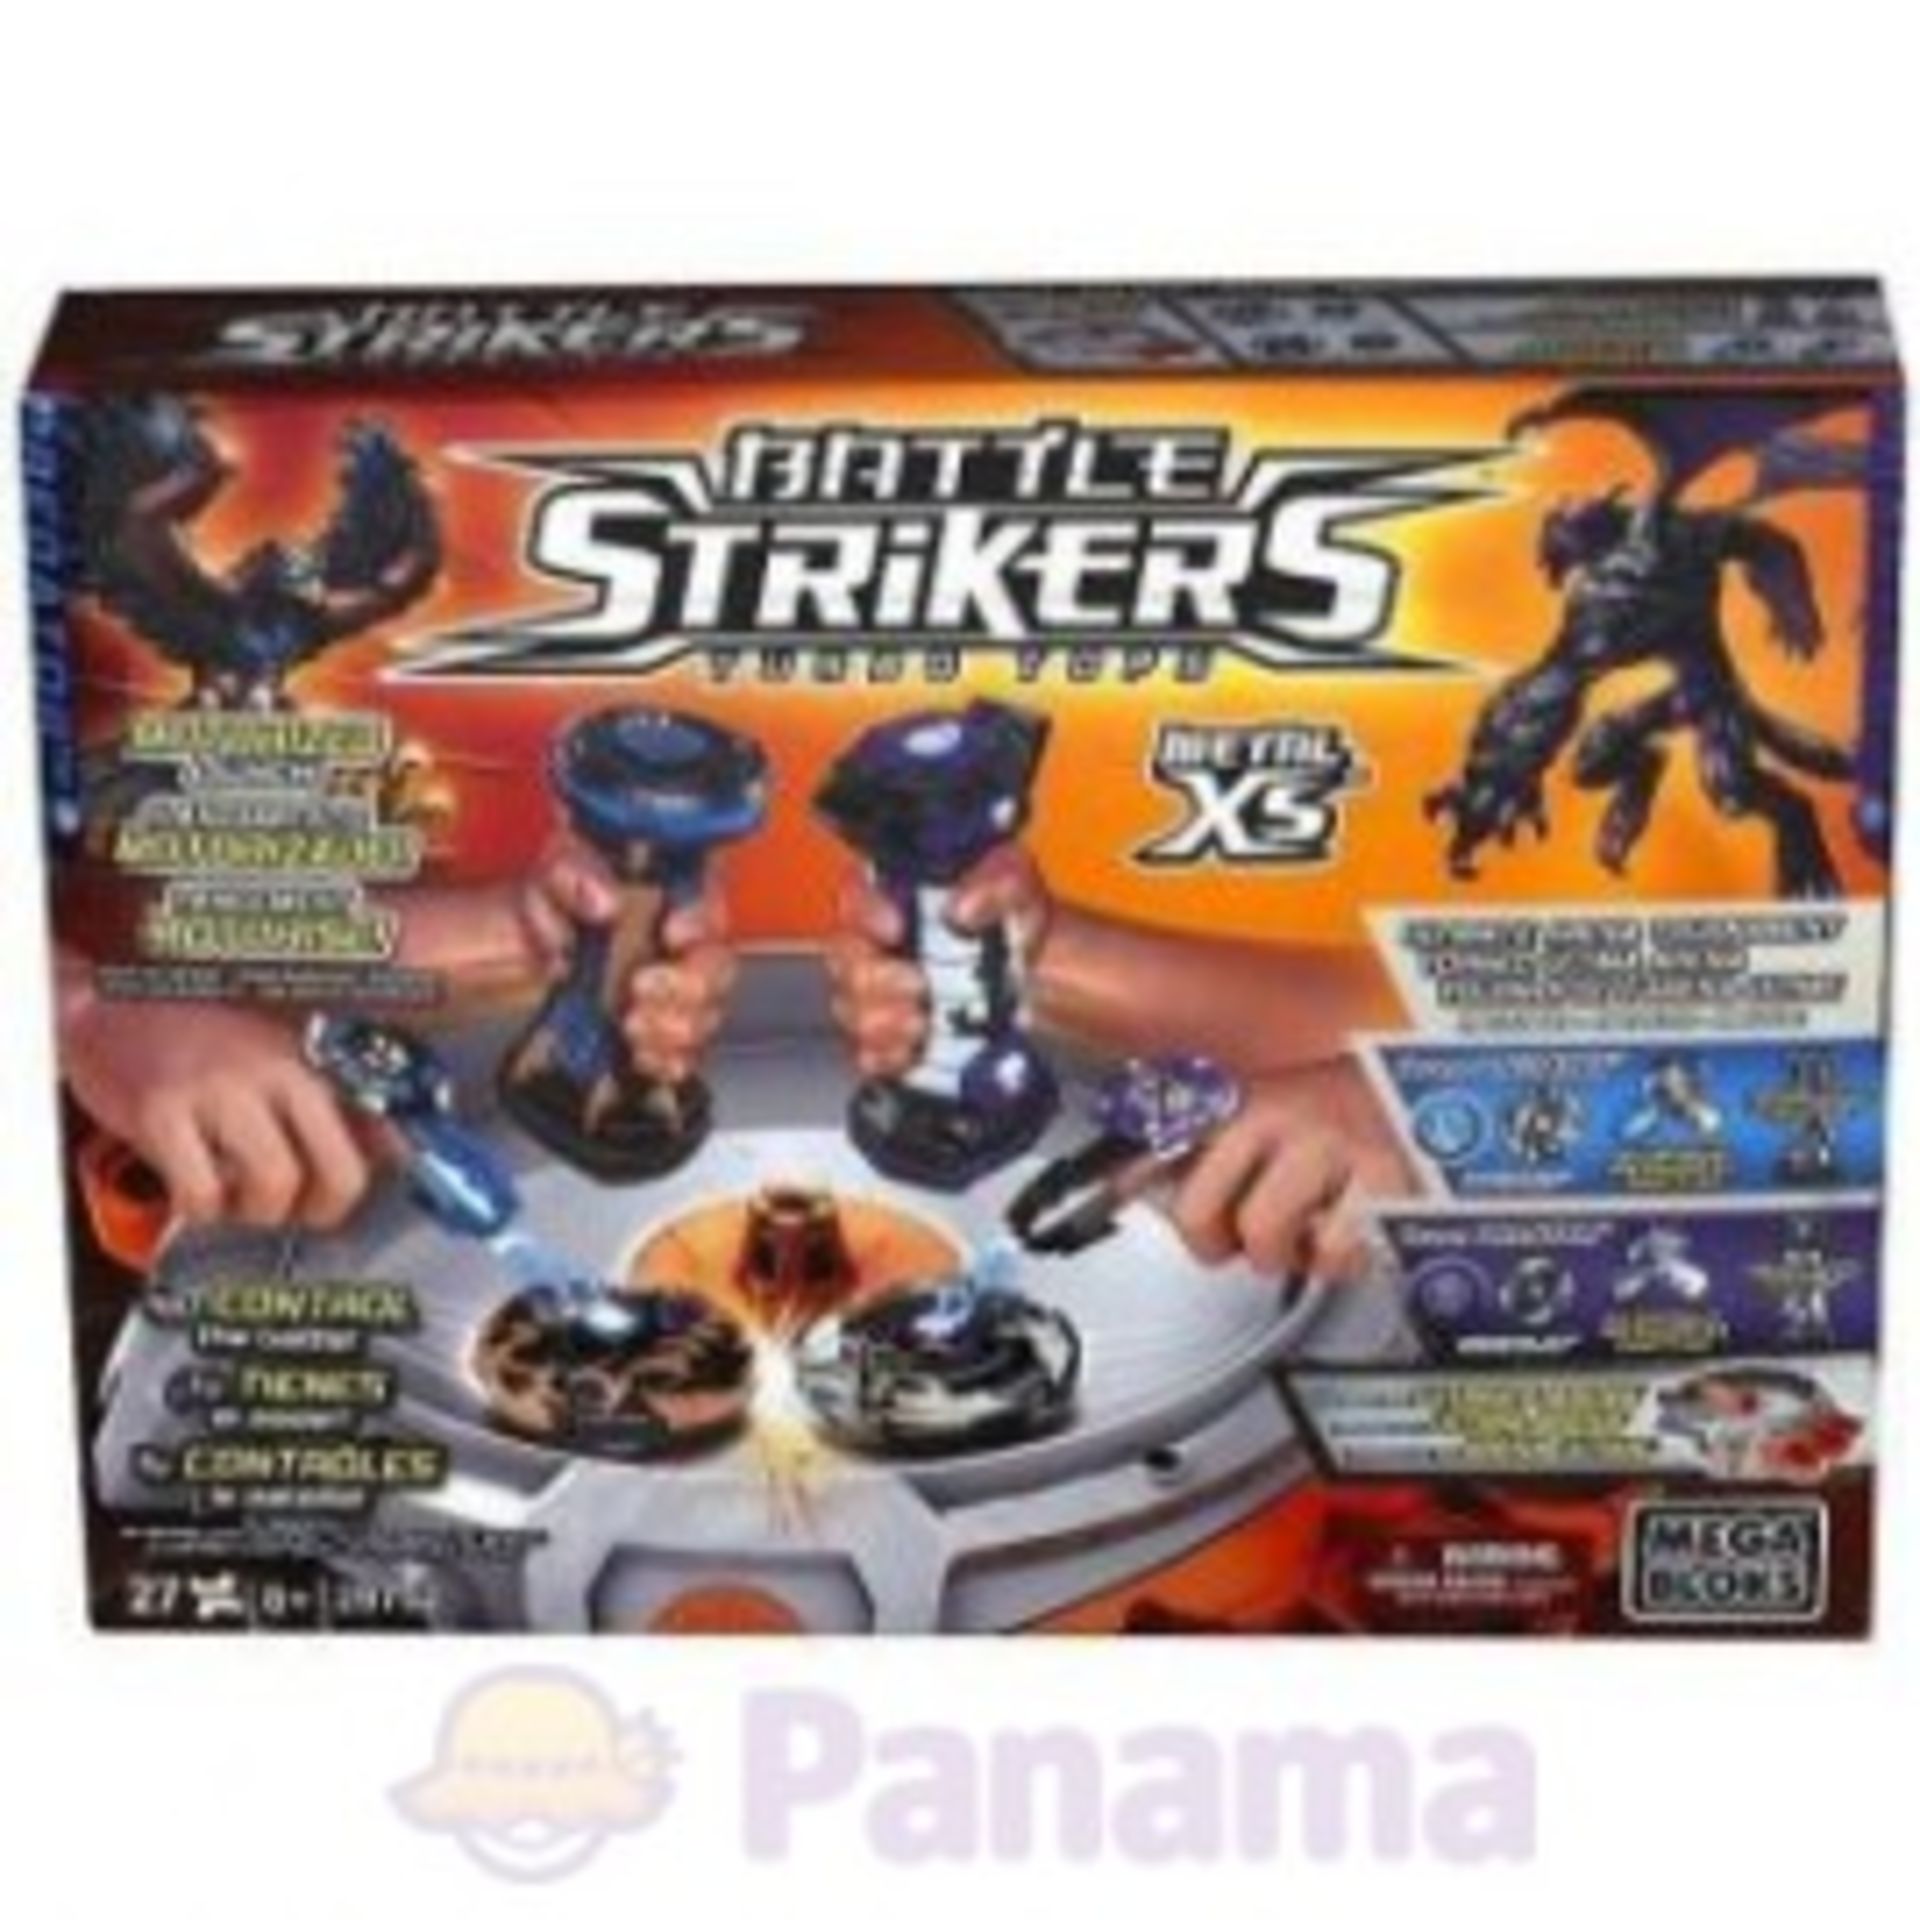 V Grade A Battle Strikers Turbo Tops Striker Case X 2 YOUR BID PRICE TO BE MULTIPLIED BY TWO